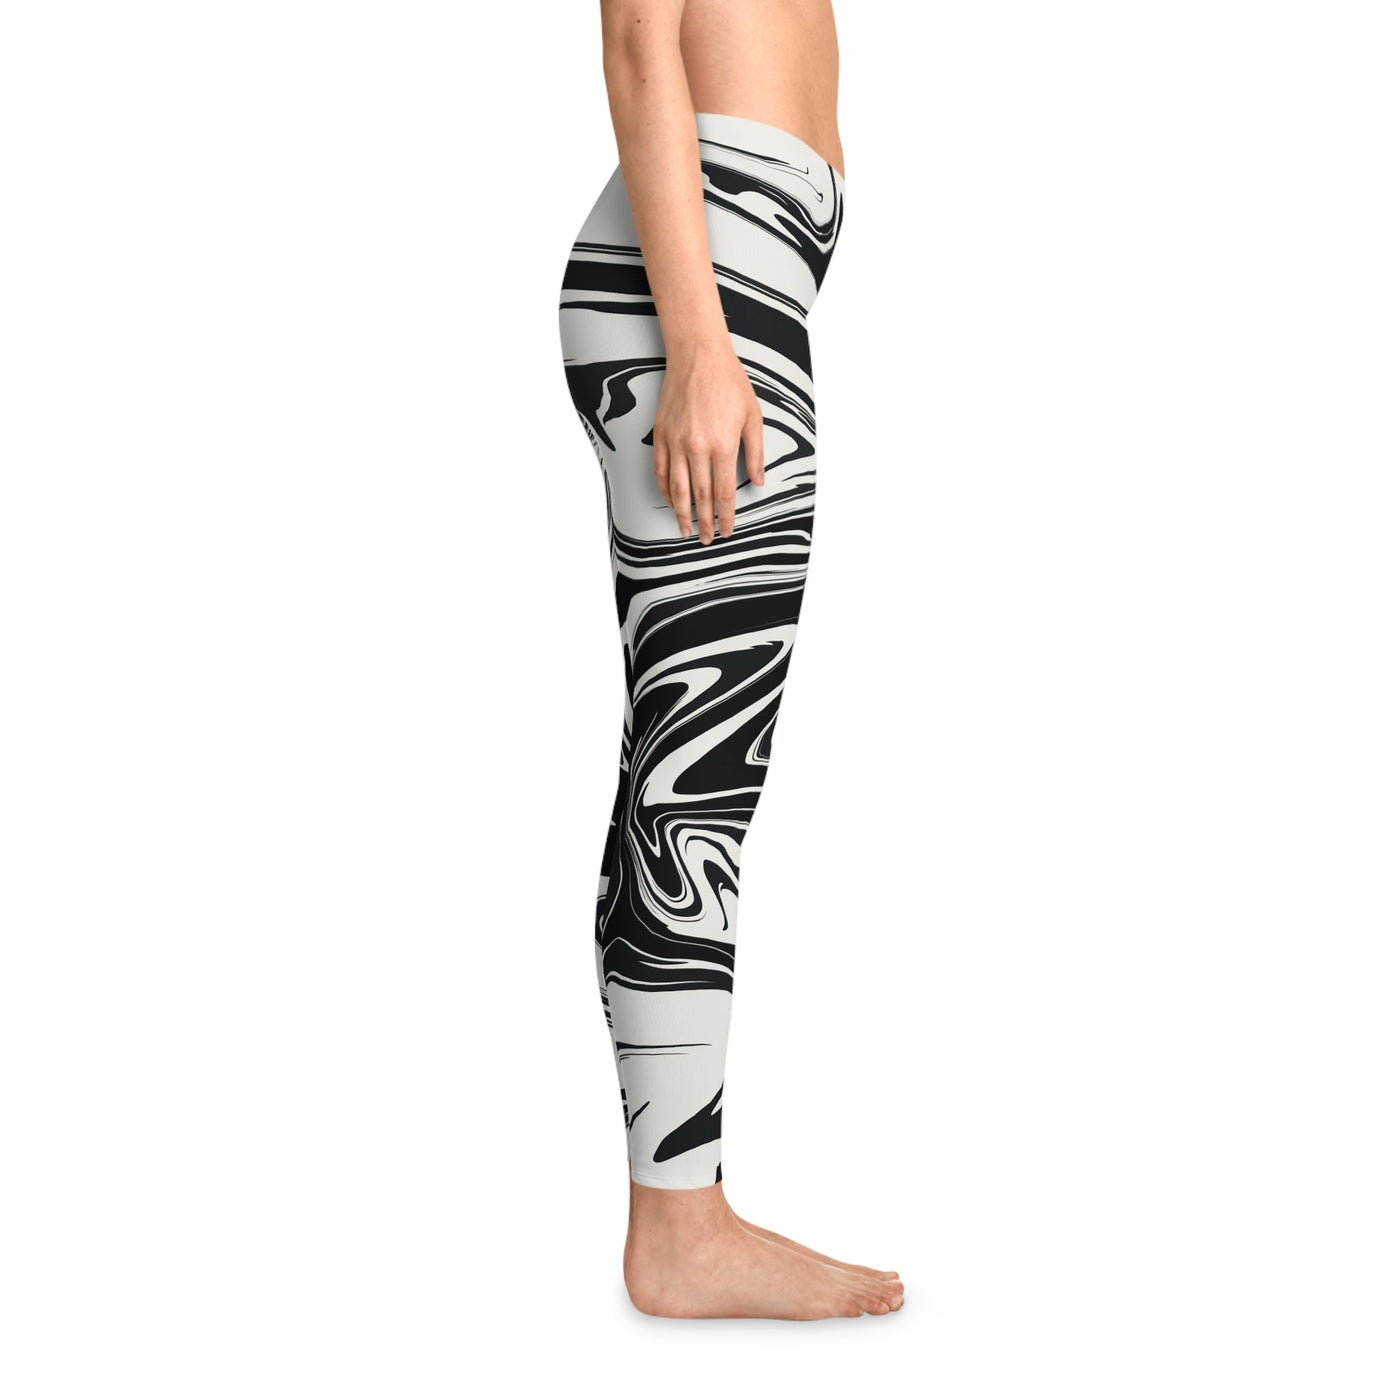 Wavy Black & White Abstract Psychedelic Pattern Stretchy Leggings